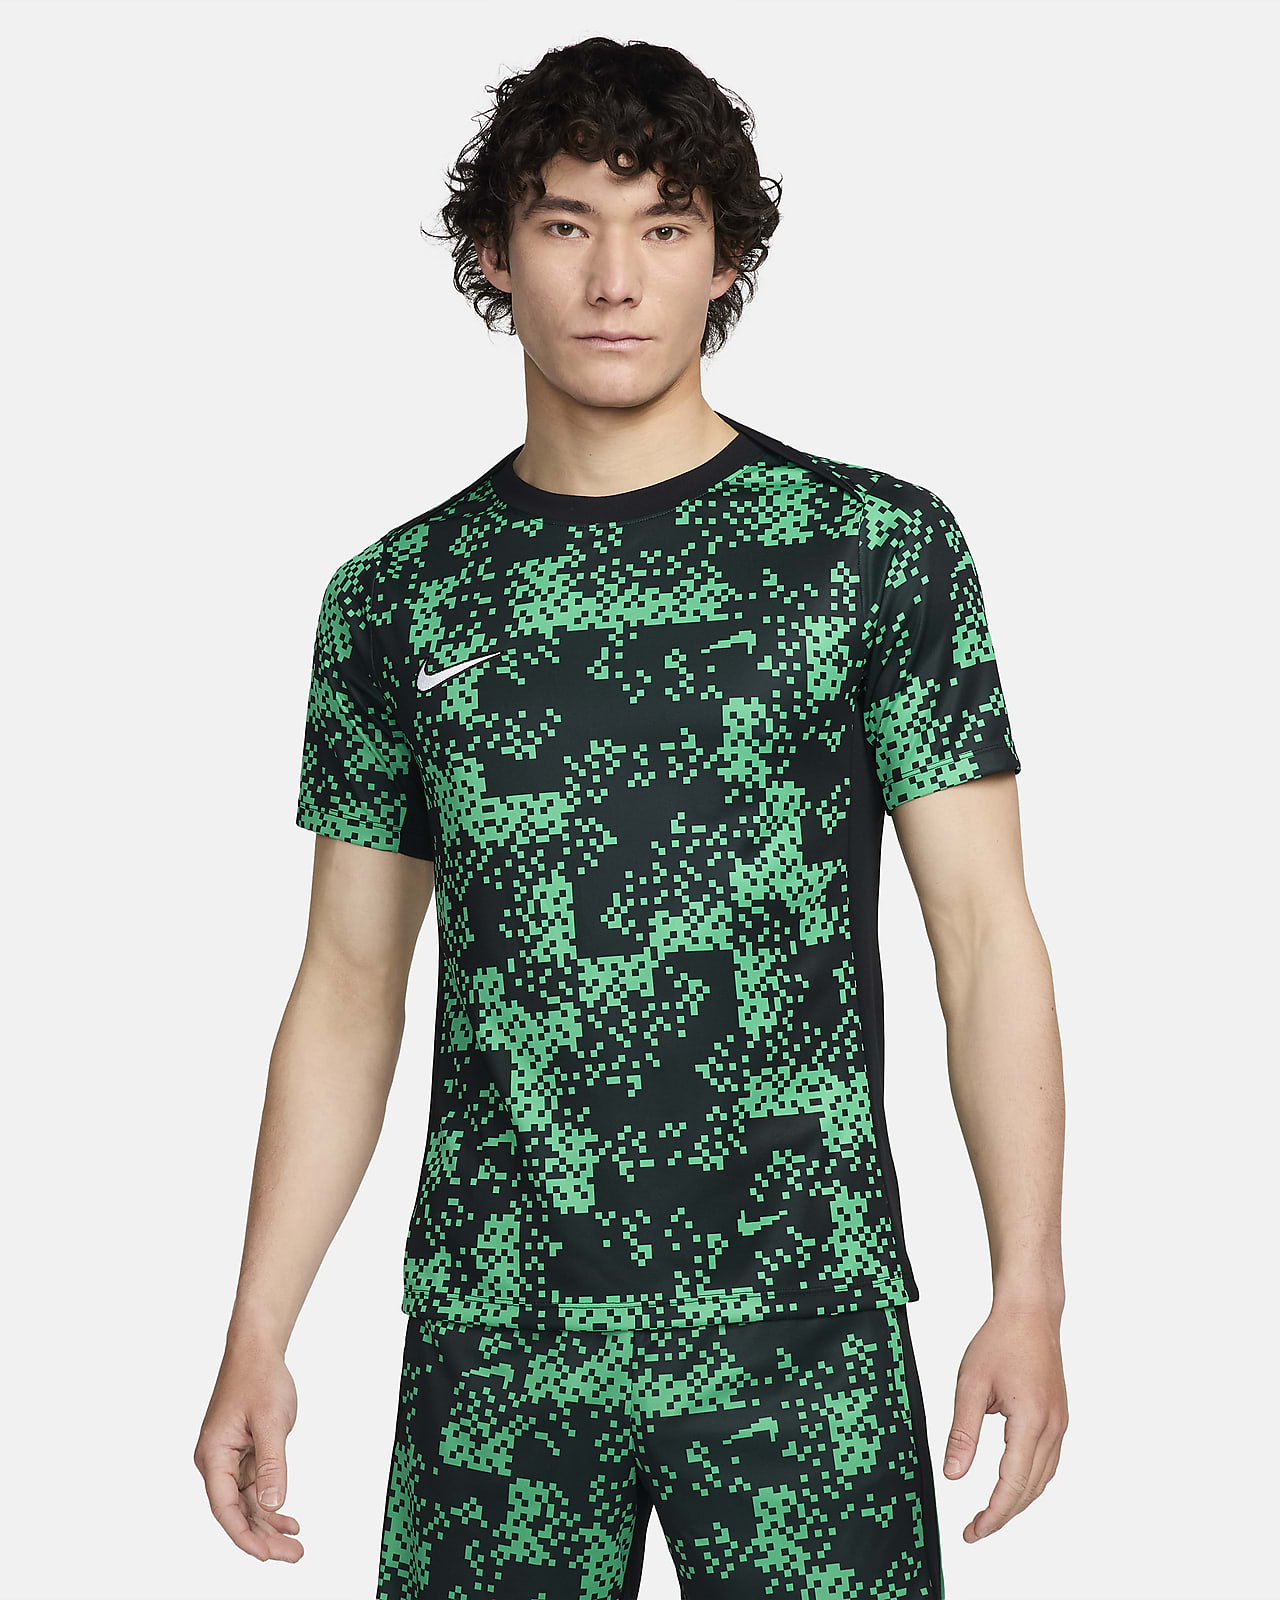 Nike Academy Pro Men's Dri-FIT Football Short-Sleeve Graphic Top